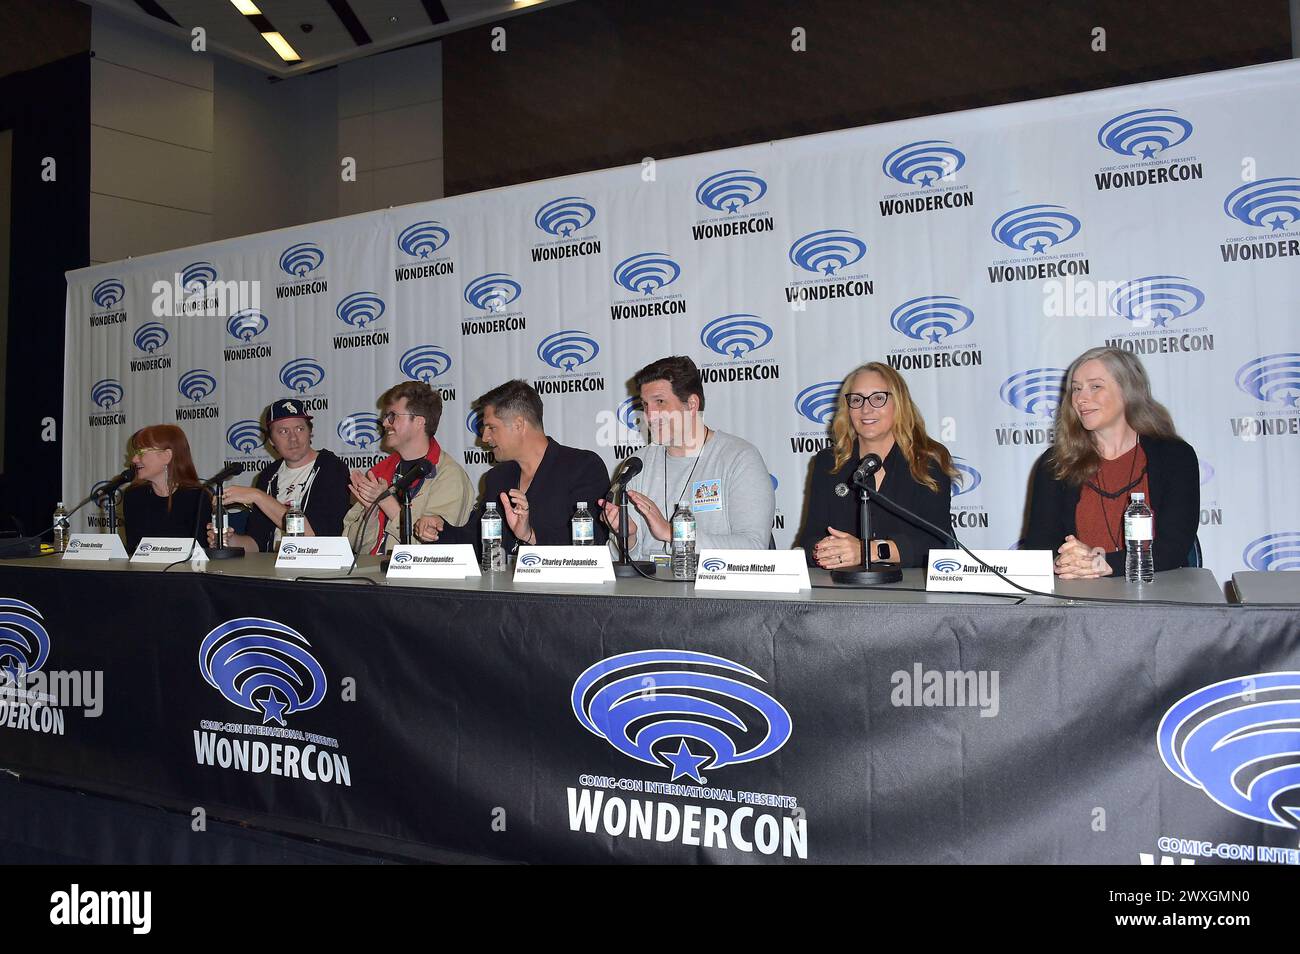 Brooke Keesling, Mike Hollingsworth, Alex Salyer, Vlas Parlapanides, Charley Parlapanides, Monica Mitchell e Amy Winfrey beim Monsters of Adult Animation Panel auf der WonderCon 2024 presso il centro convegni di Anaheim. Anaheim, 30.03.2024 *** Brooke Keesling, Mike Hollingsworth, Alex Salyer, Vlas Parlapanides, Charley Parlapanides, Monica Mitchell e Amy Winfrey al panel Monsters of Adult Animation al WonderCon 2024 all'Anaheim Convention Center Anaheim, 30 03 2024 foto:xD.xStarbuckx/xFuturexImagex wondercon 4450 Foto Stock